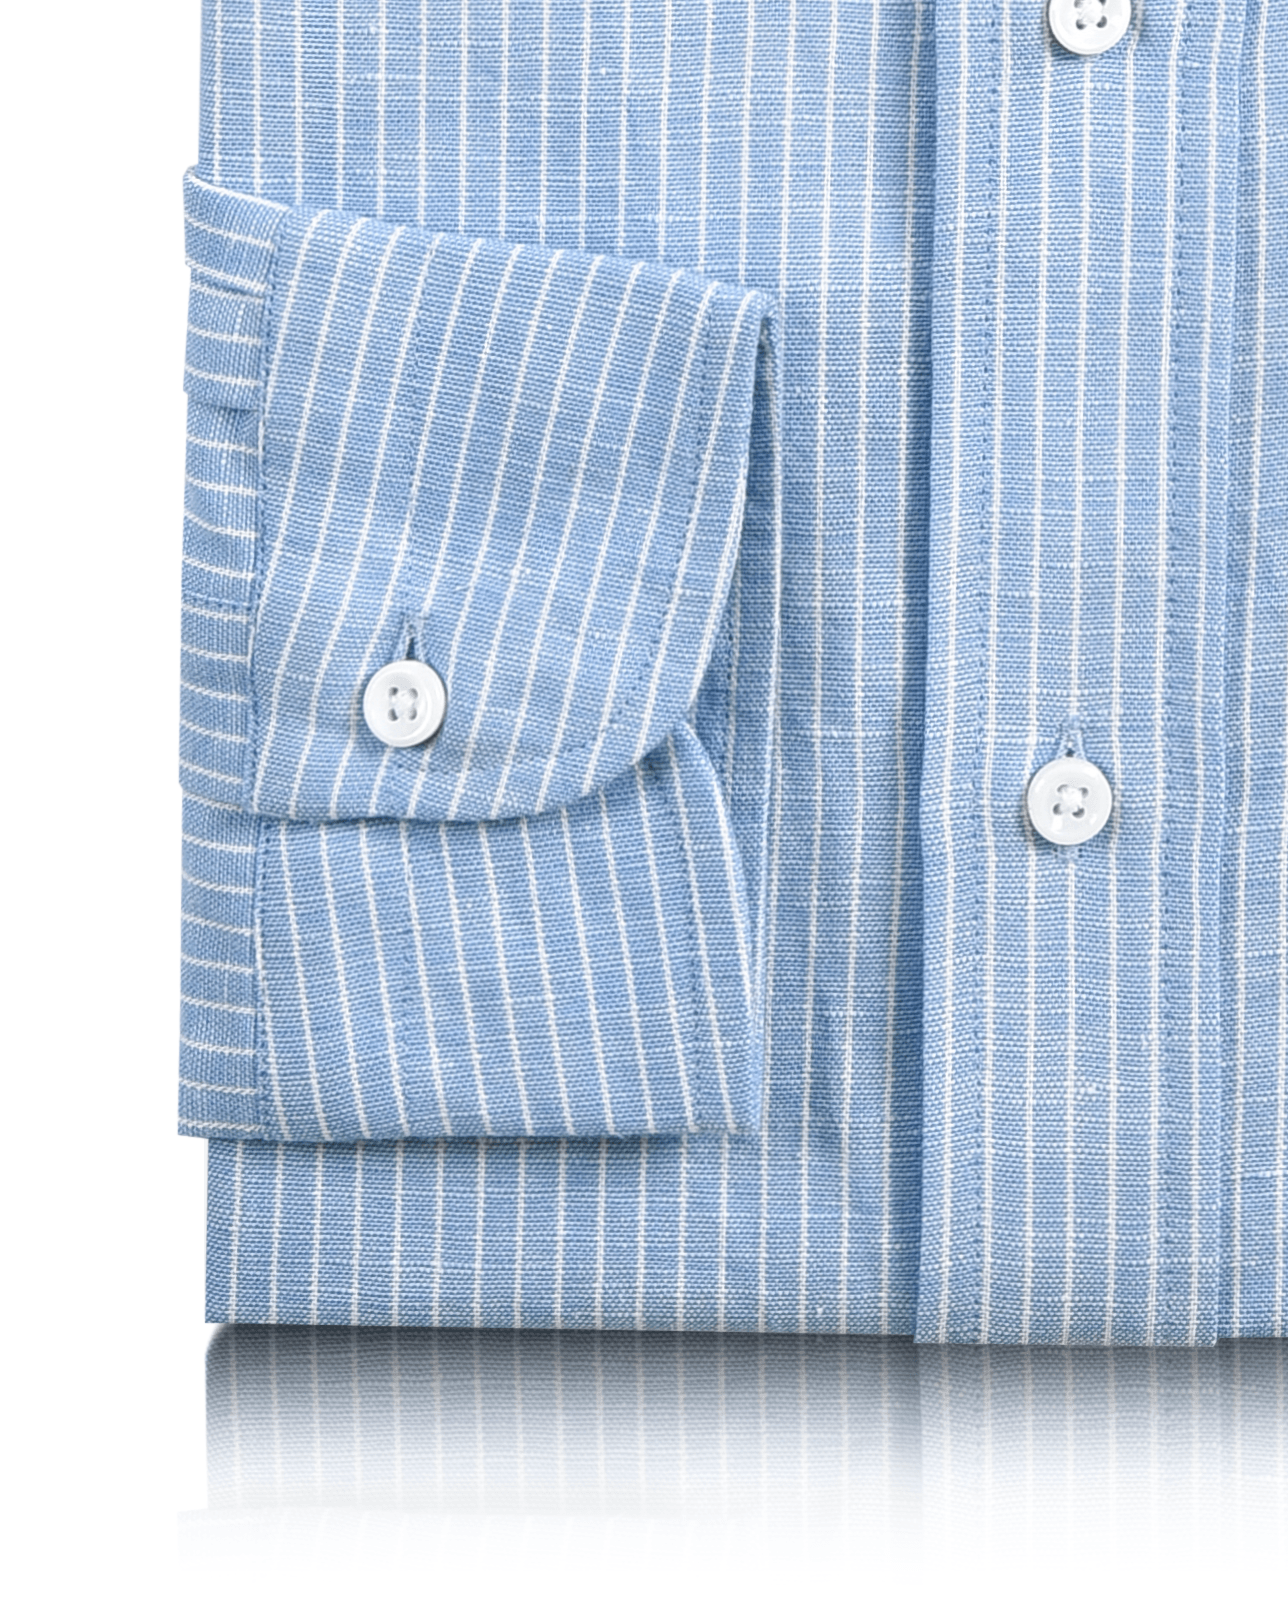 Cuff of the custom linen shirt for men in blue with white pinstripes by Luxire Clothing